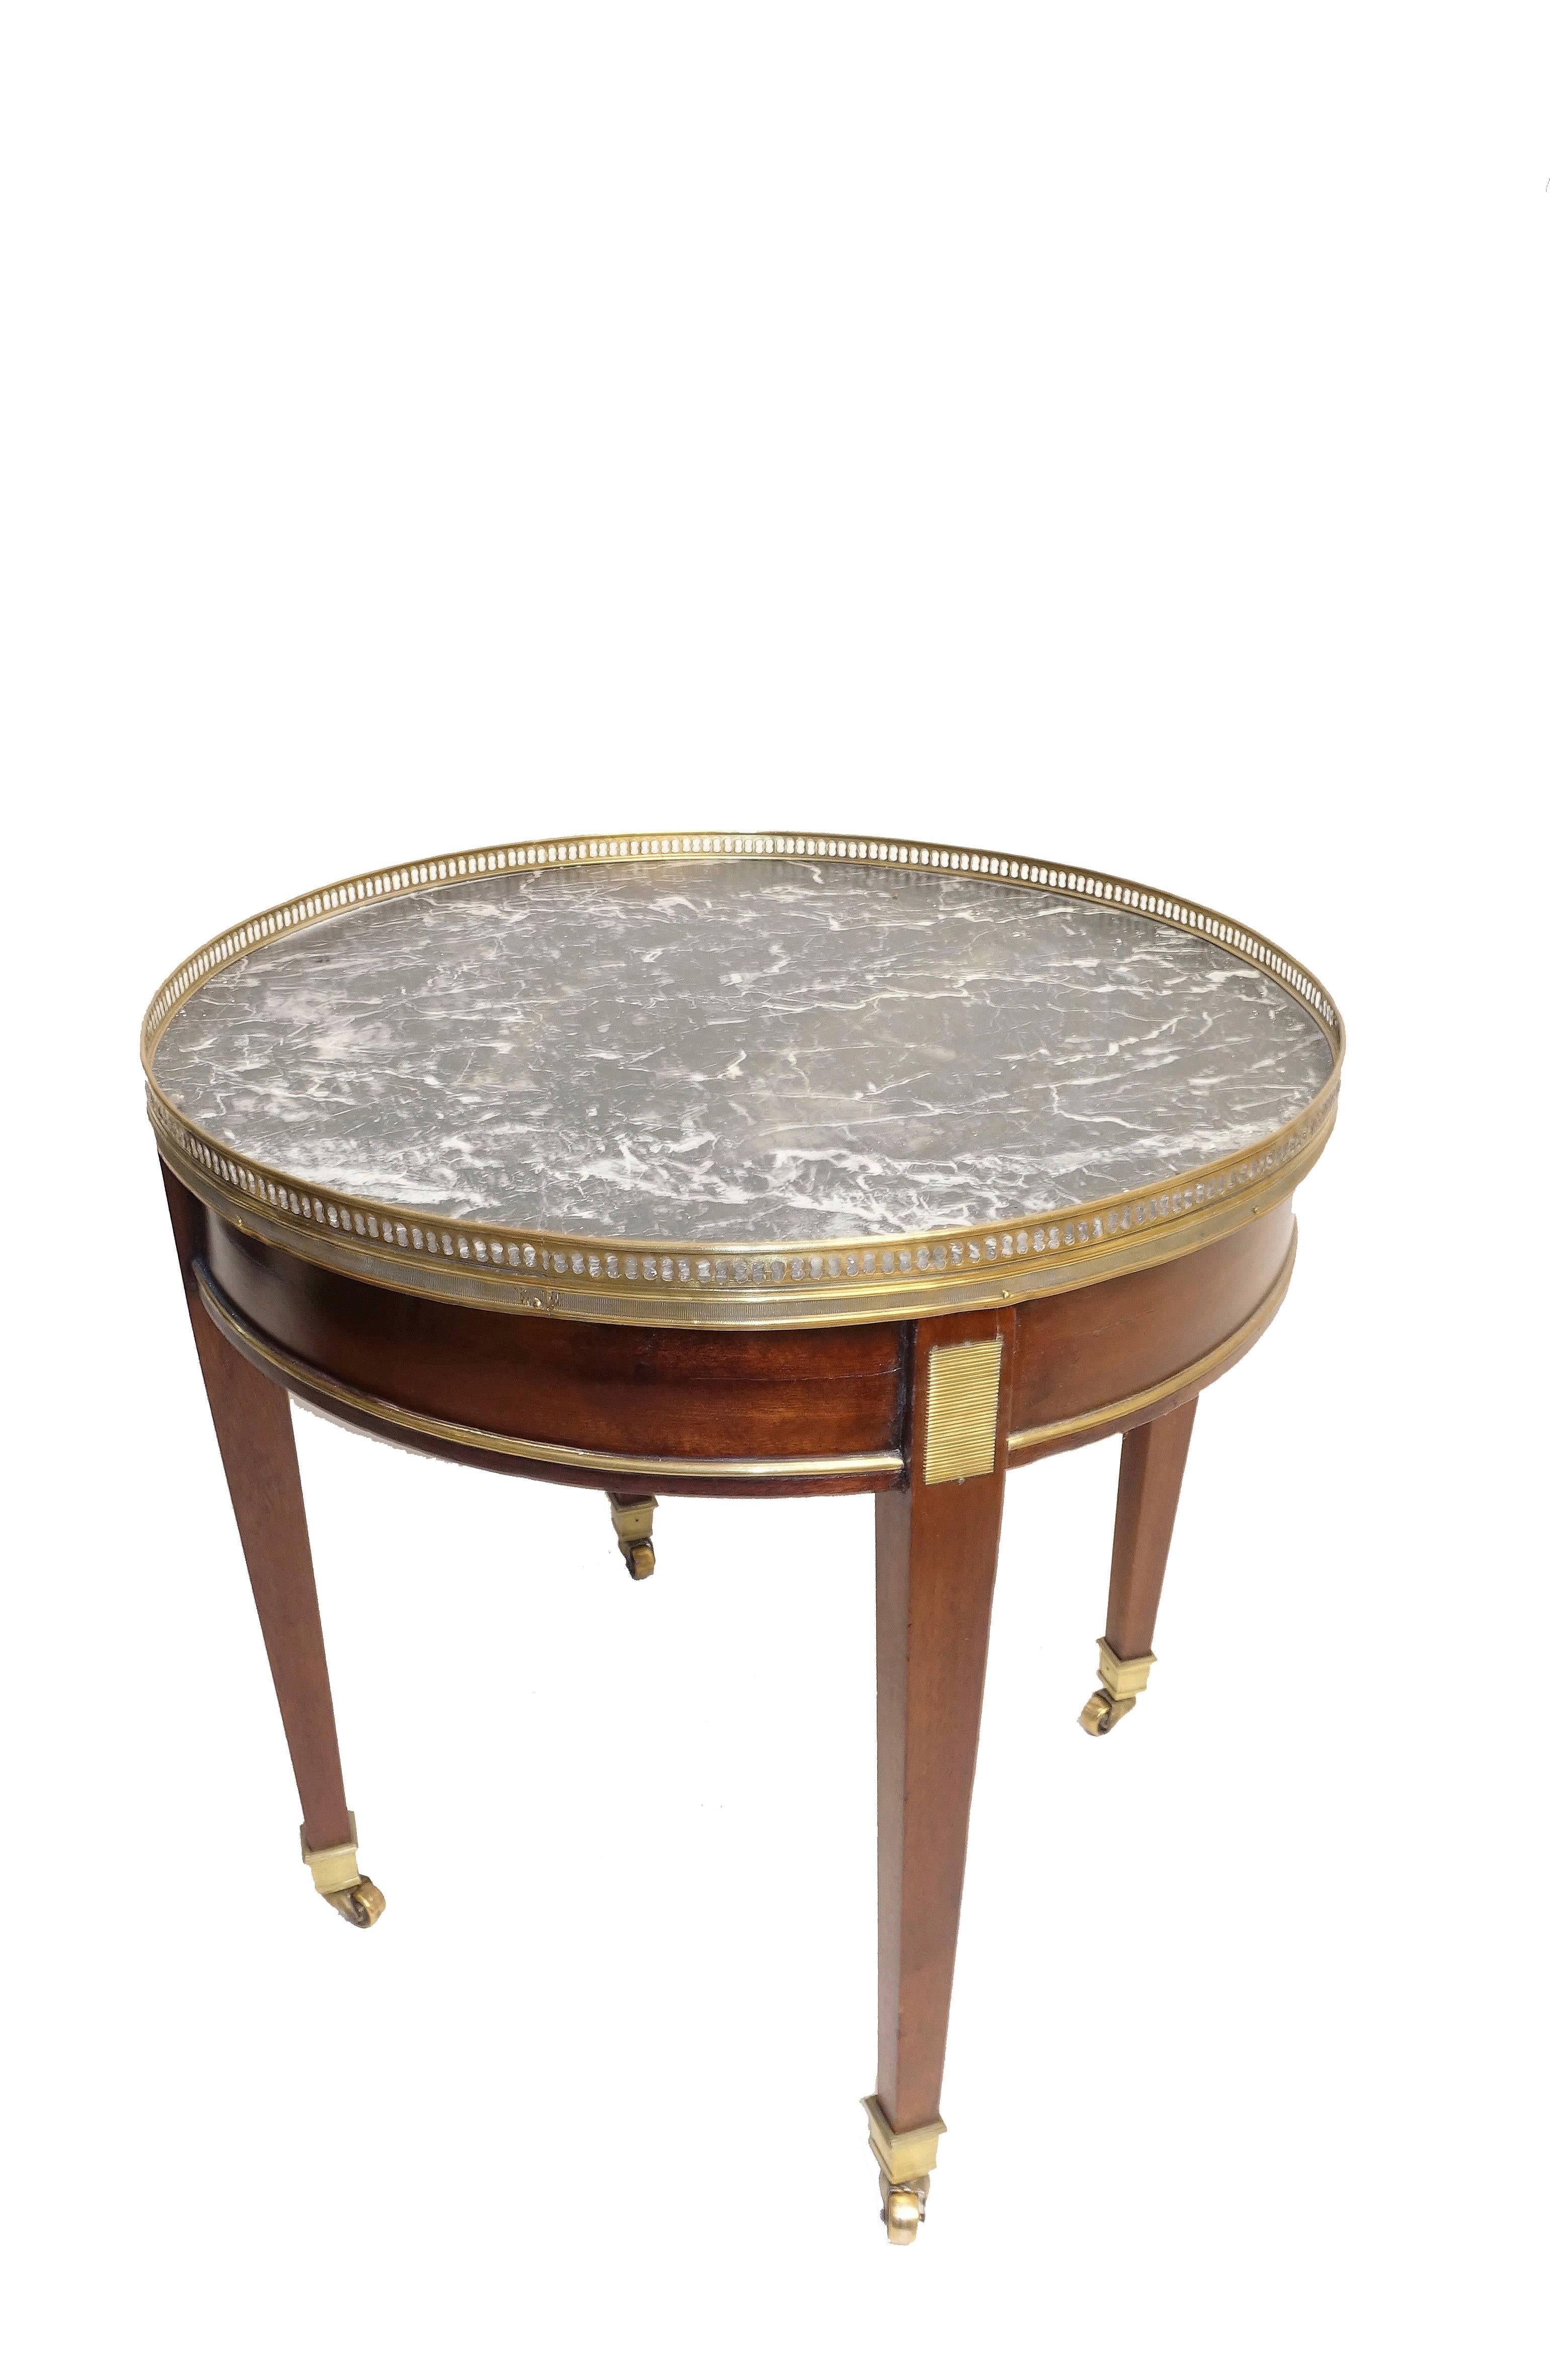 Brass Louis XVI Style Mahogany Bouillotte Table with Marble Top, French, 19th Century